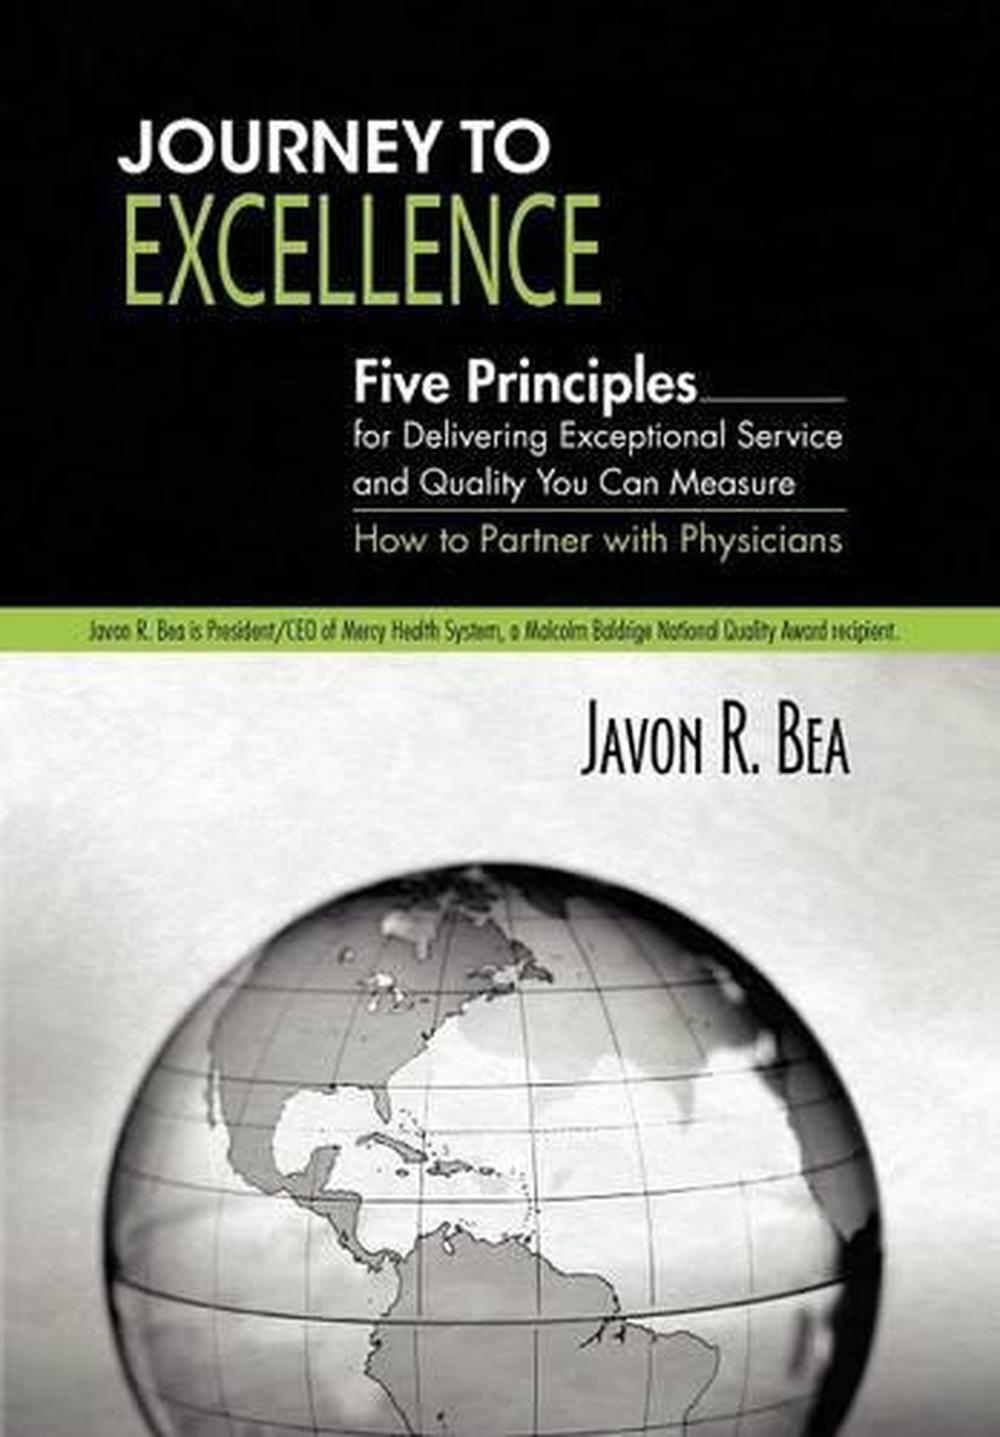 journey to excellence book